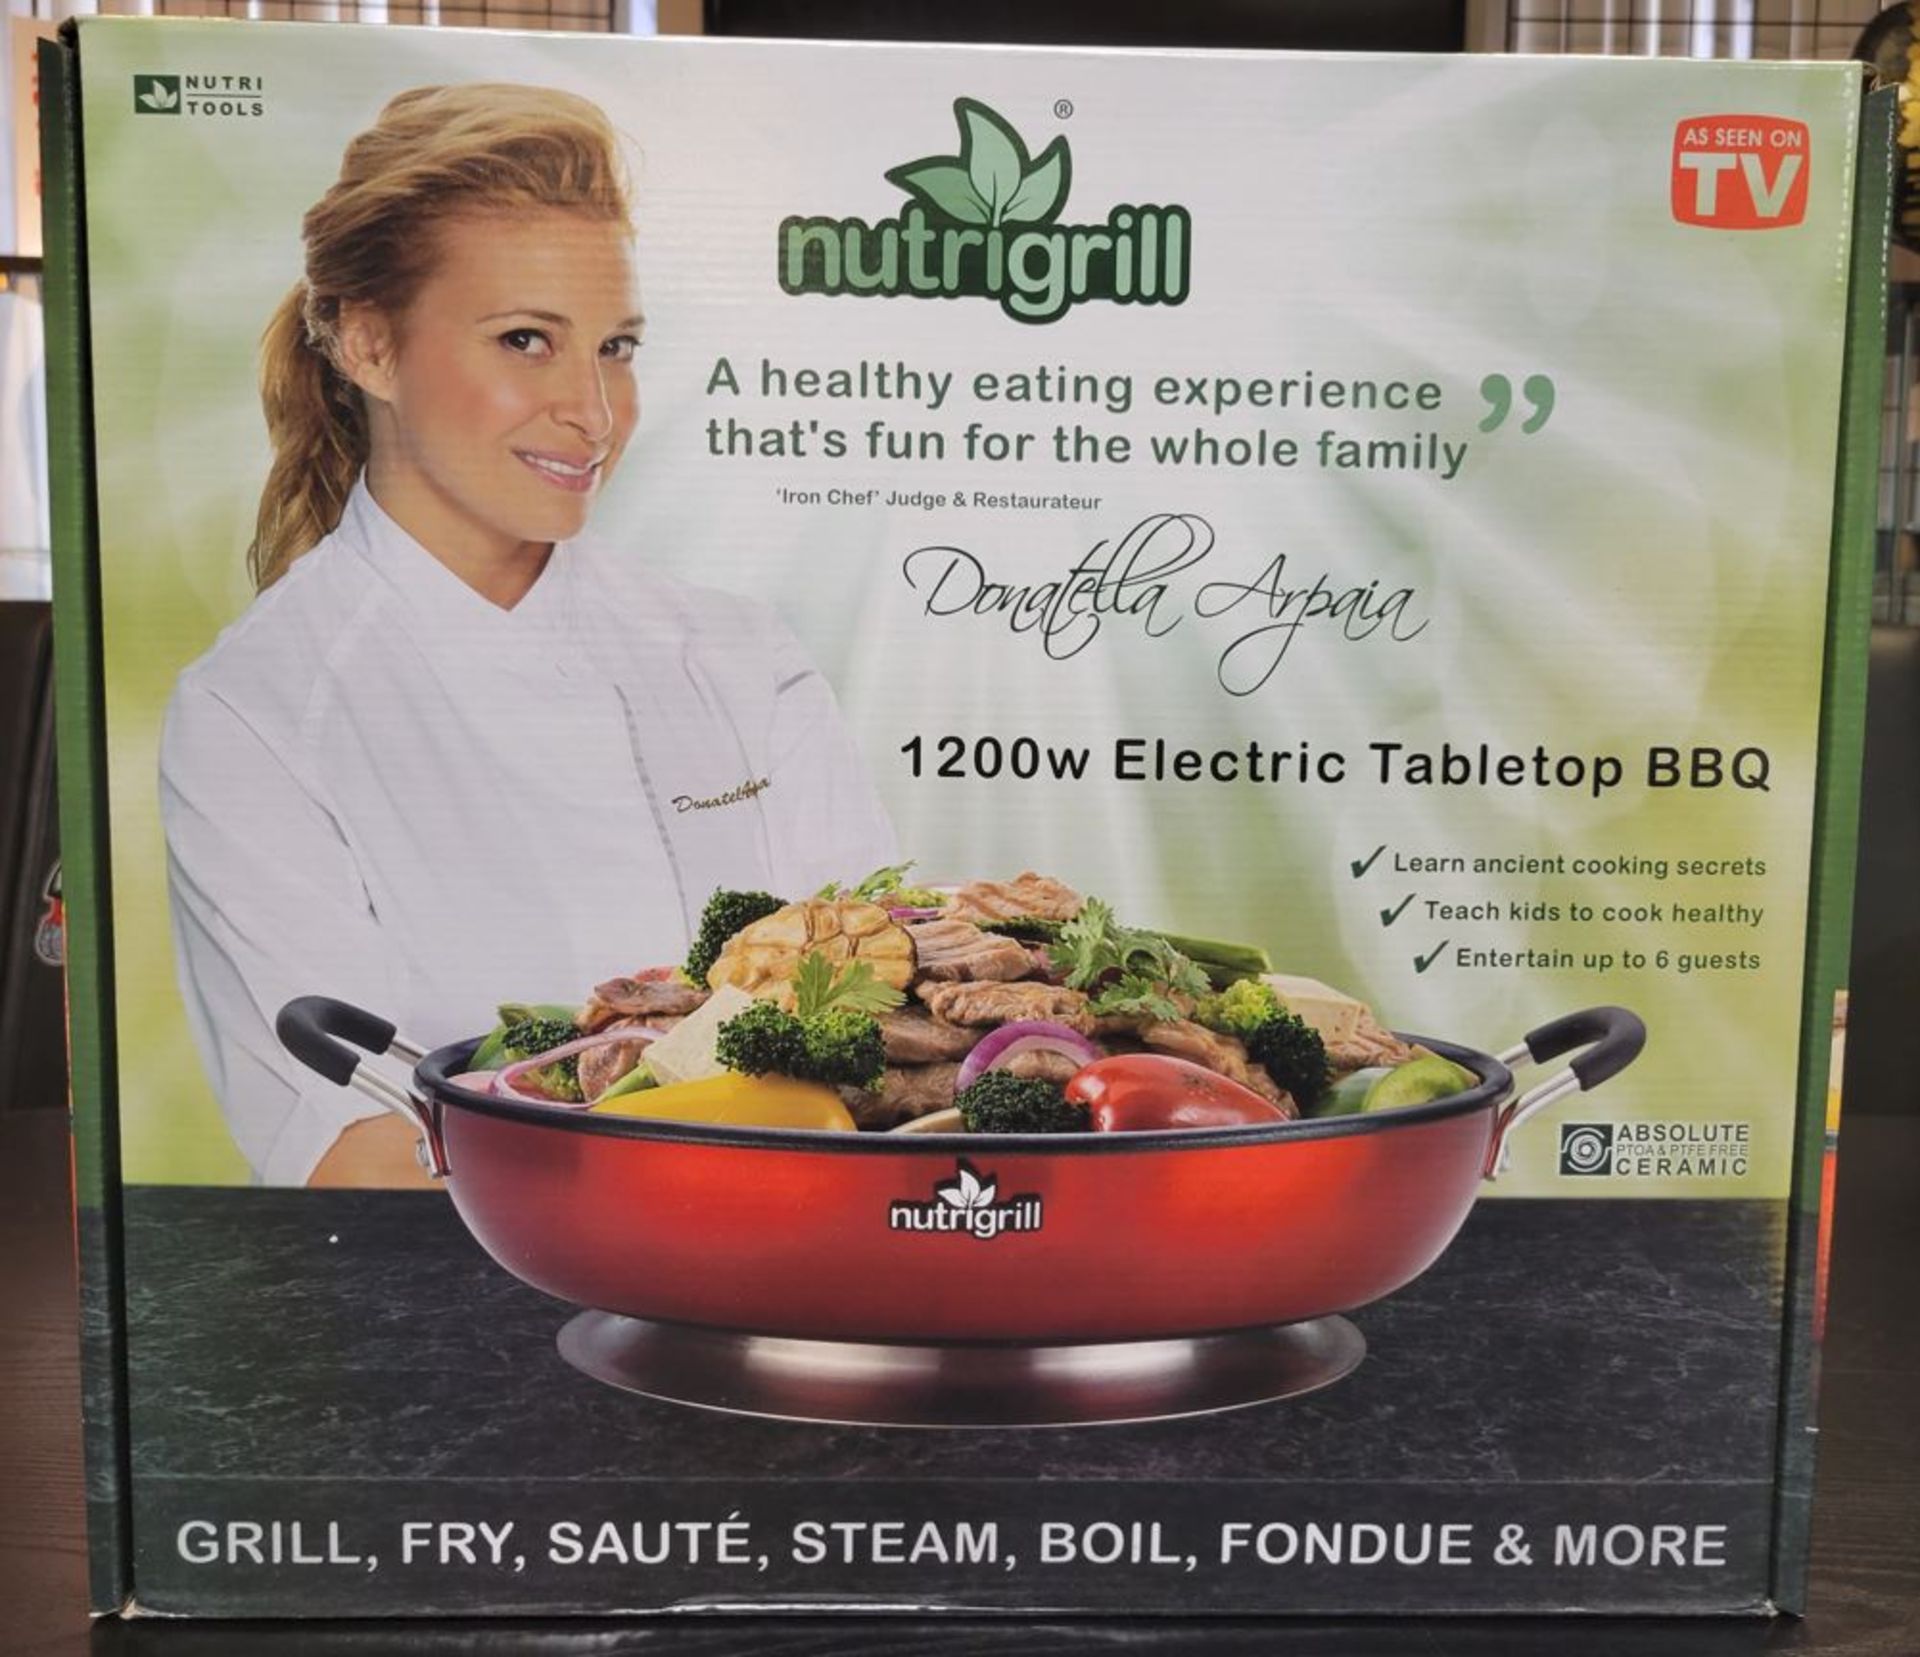 Nutrigrill 1200w Electric Tabletop BBQ - MSRP $159.99